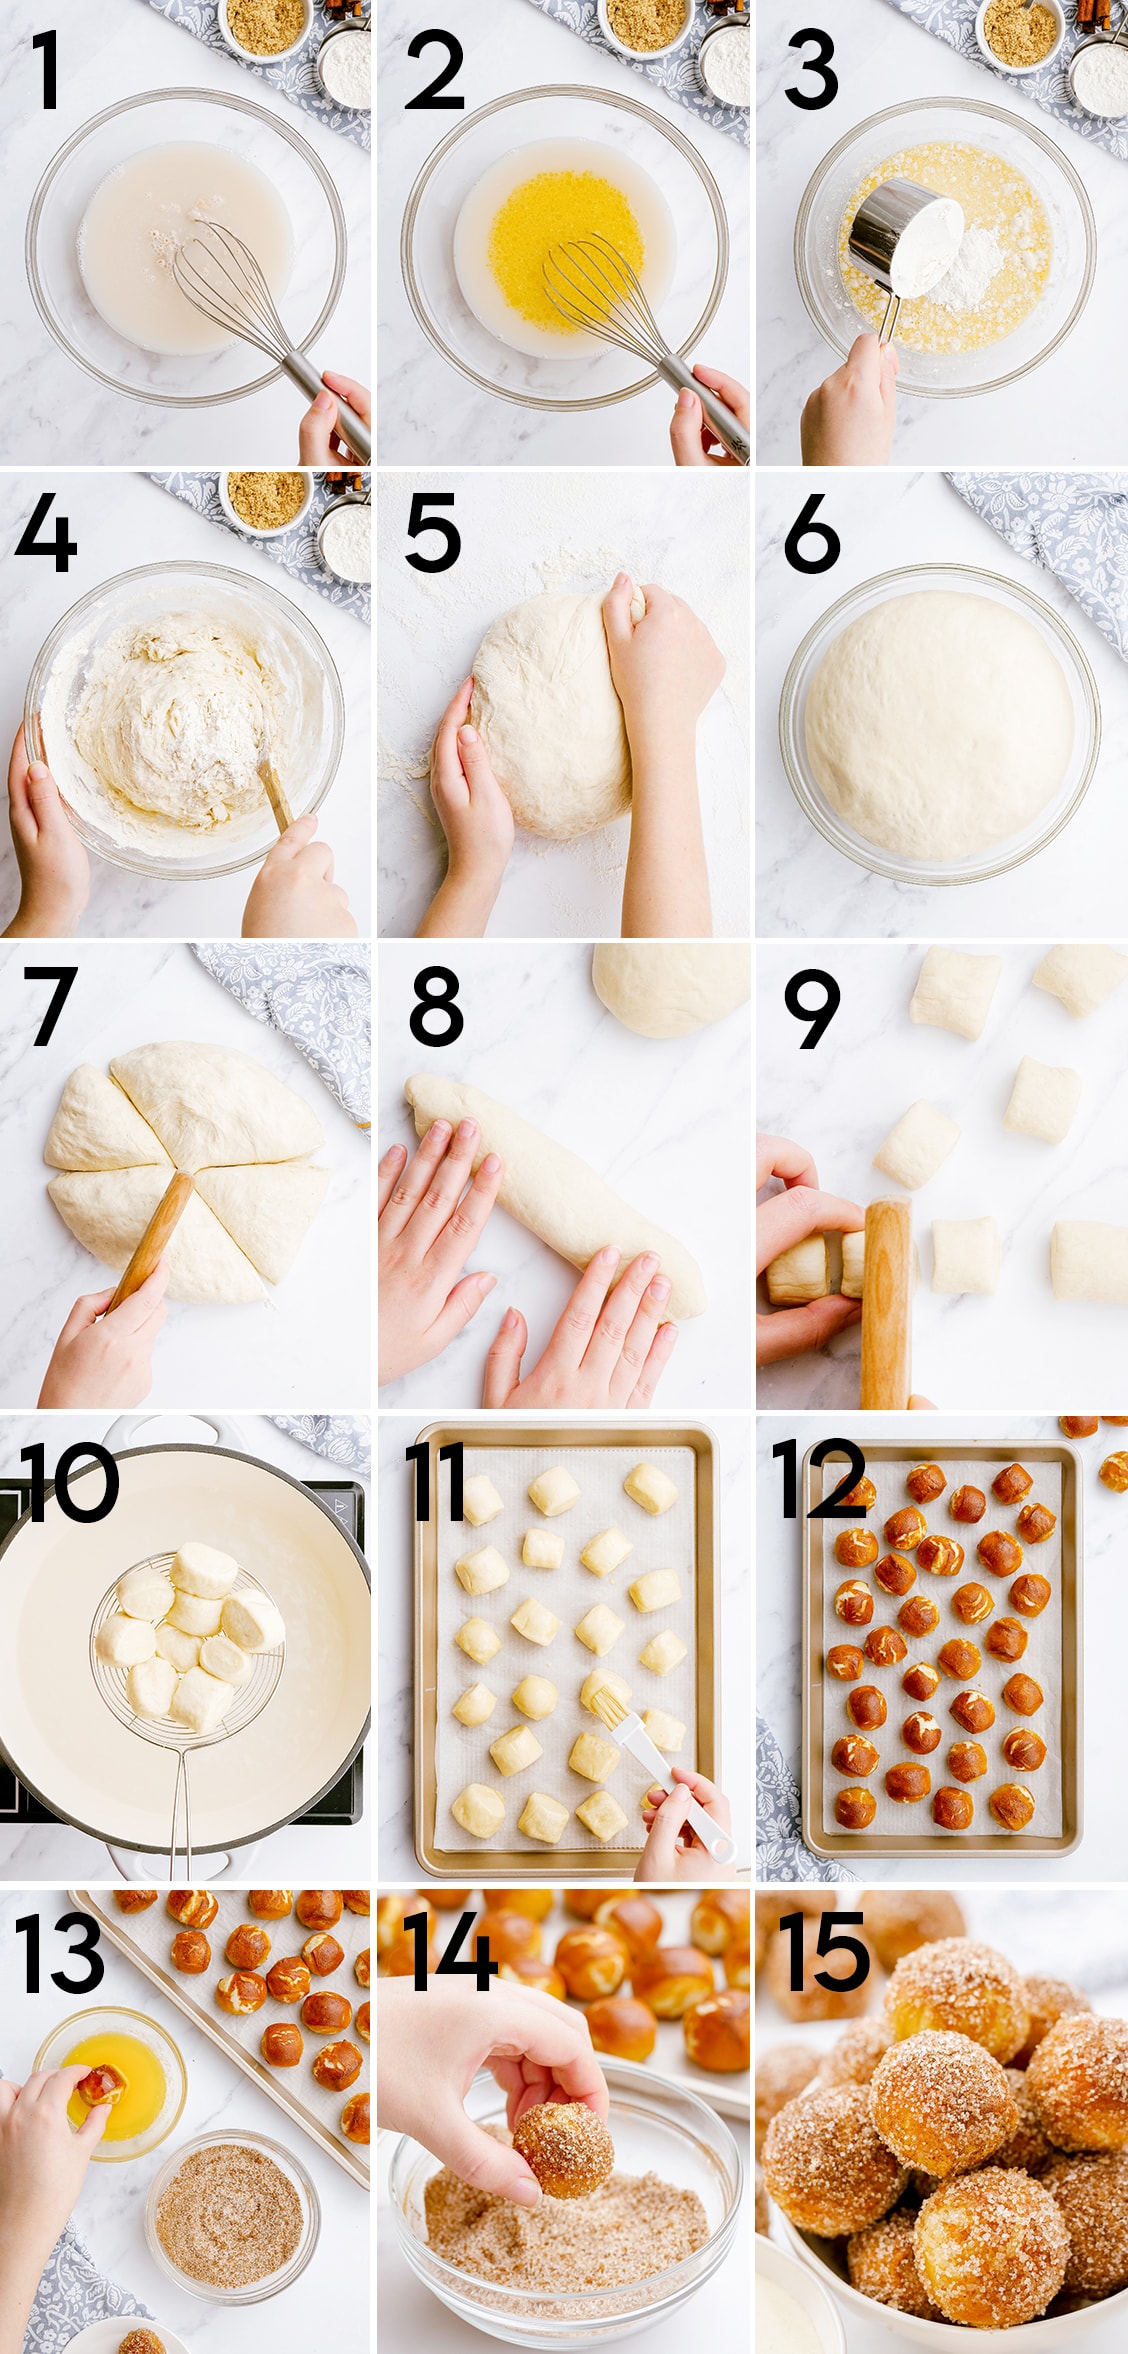 A collage of 15 step by step photos showing how to make cinnamon sugar soft pretzel bites. They are numbered to go along with the steps in the blog text.